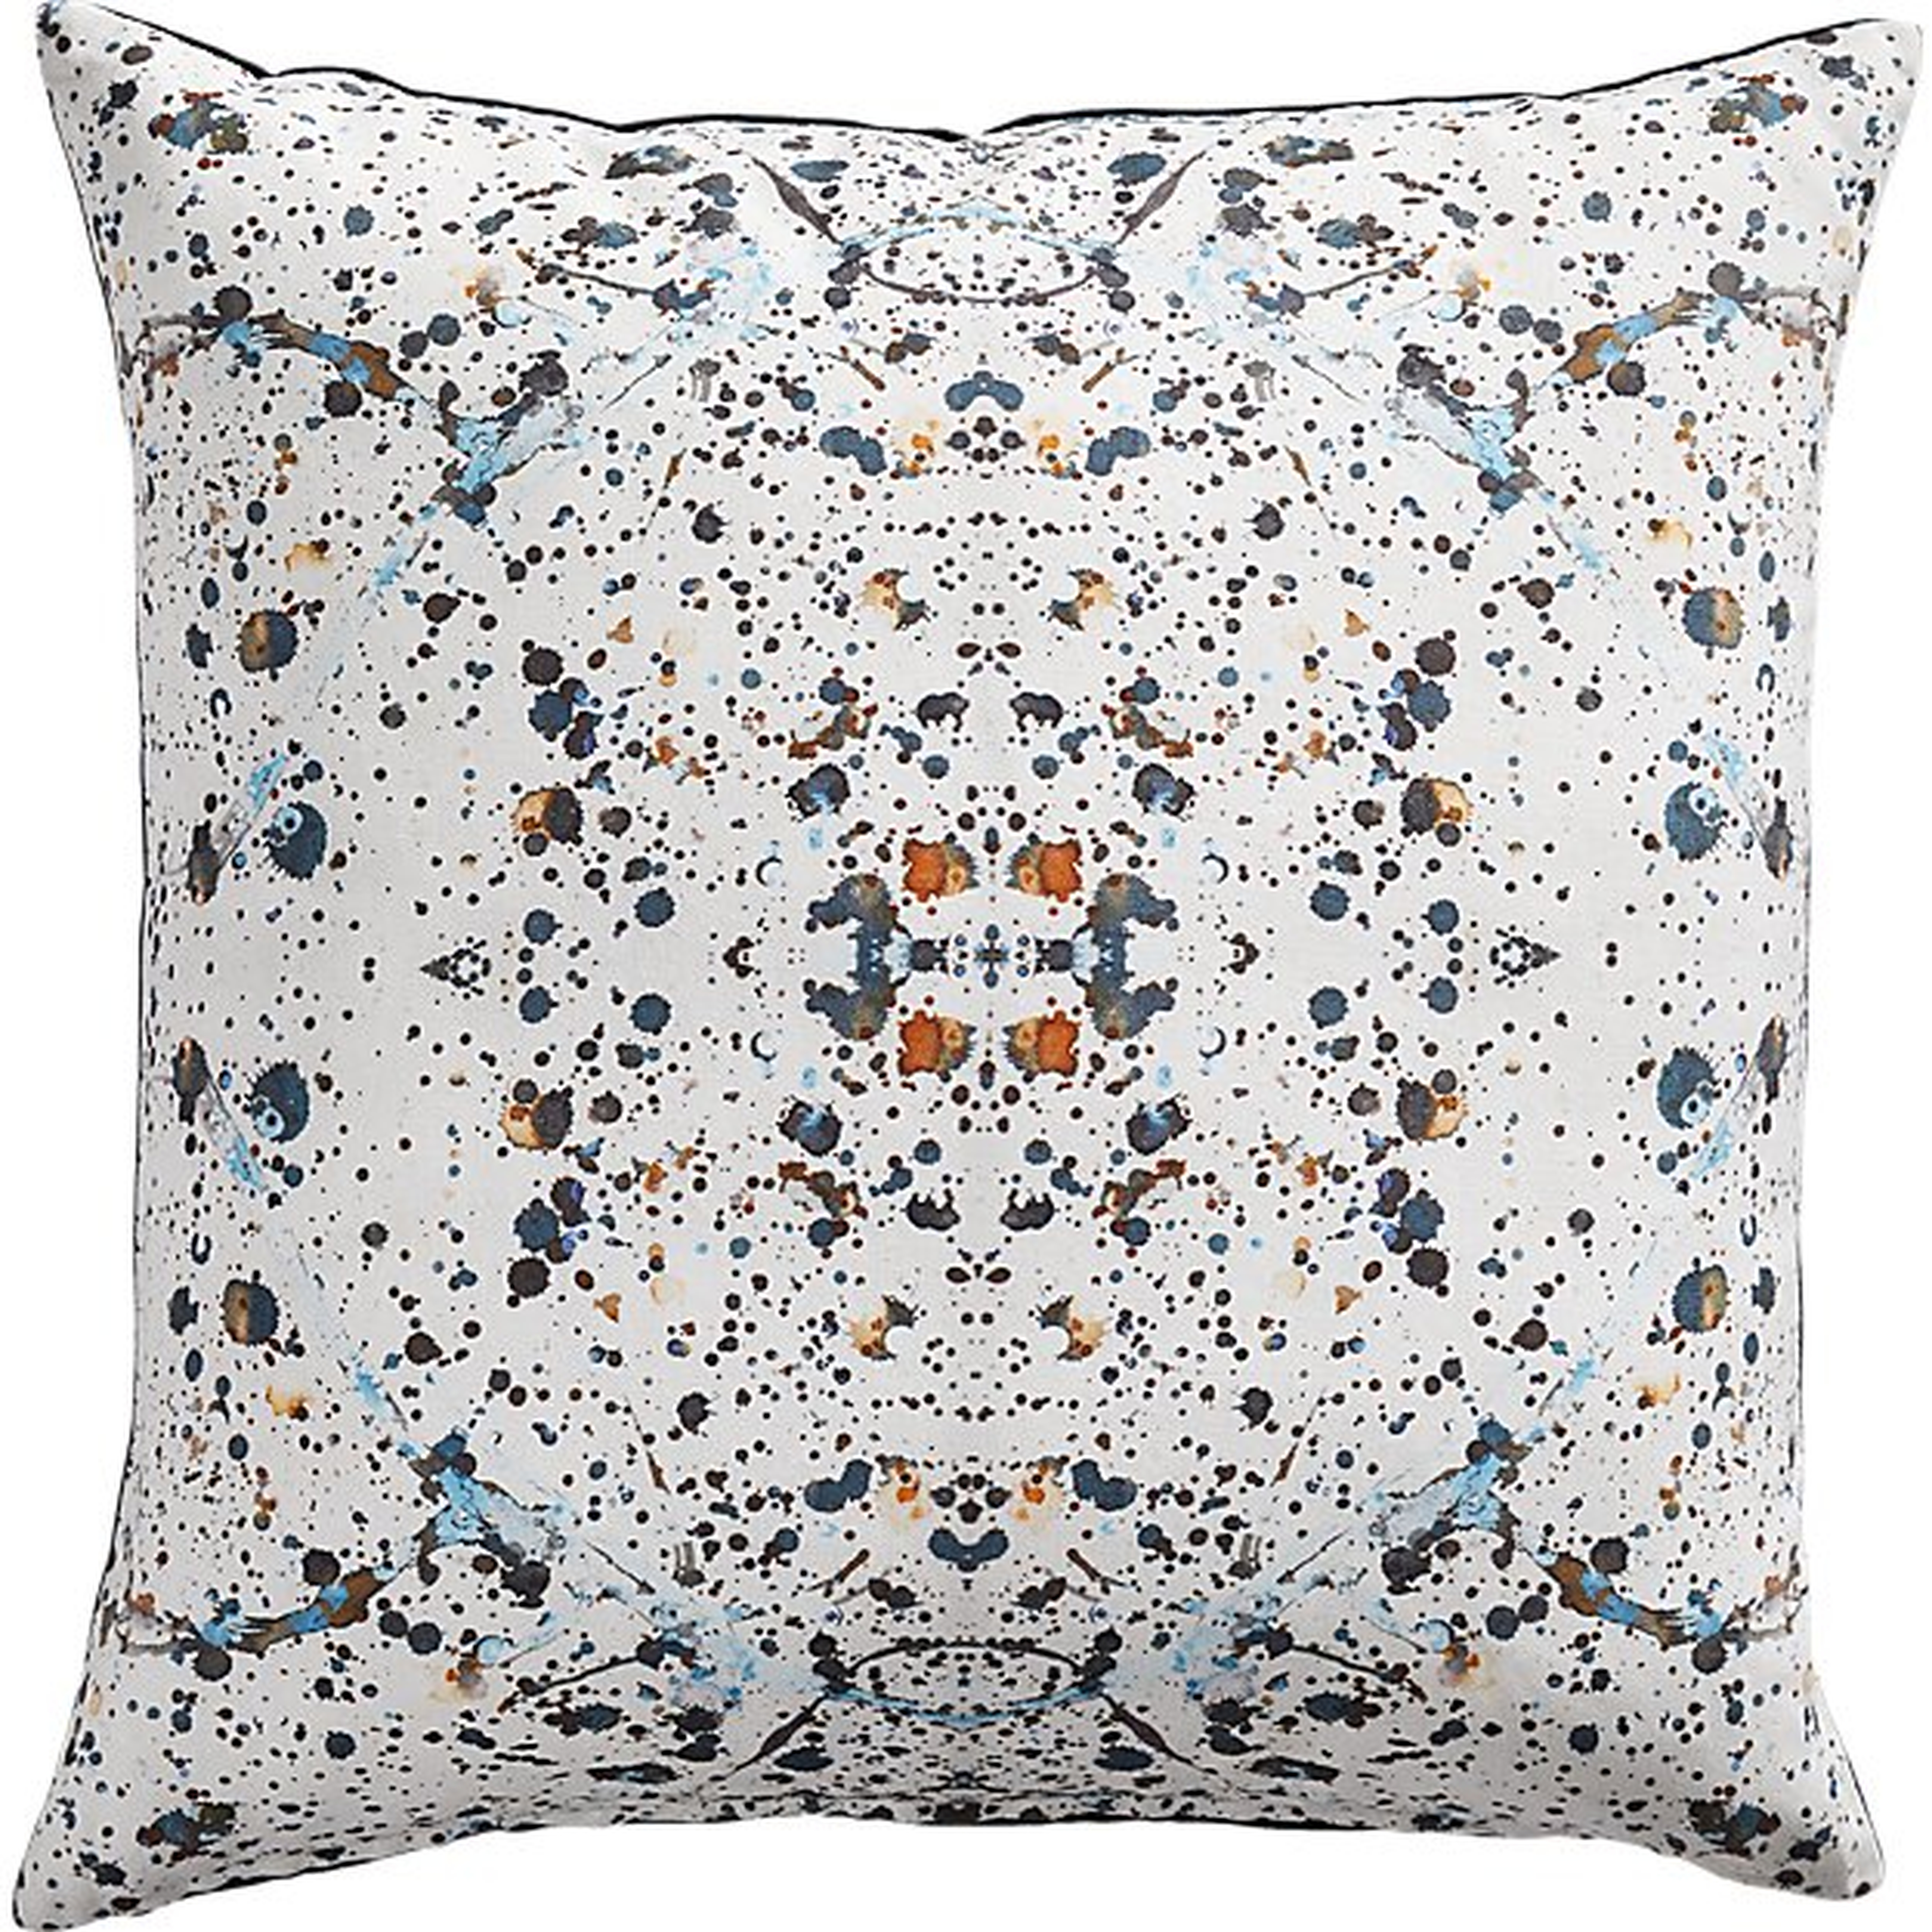 23" SPLATTER PILLOW WITH FEATHER-DOWN INSERT - CB2